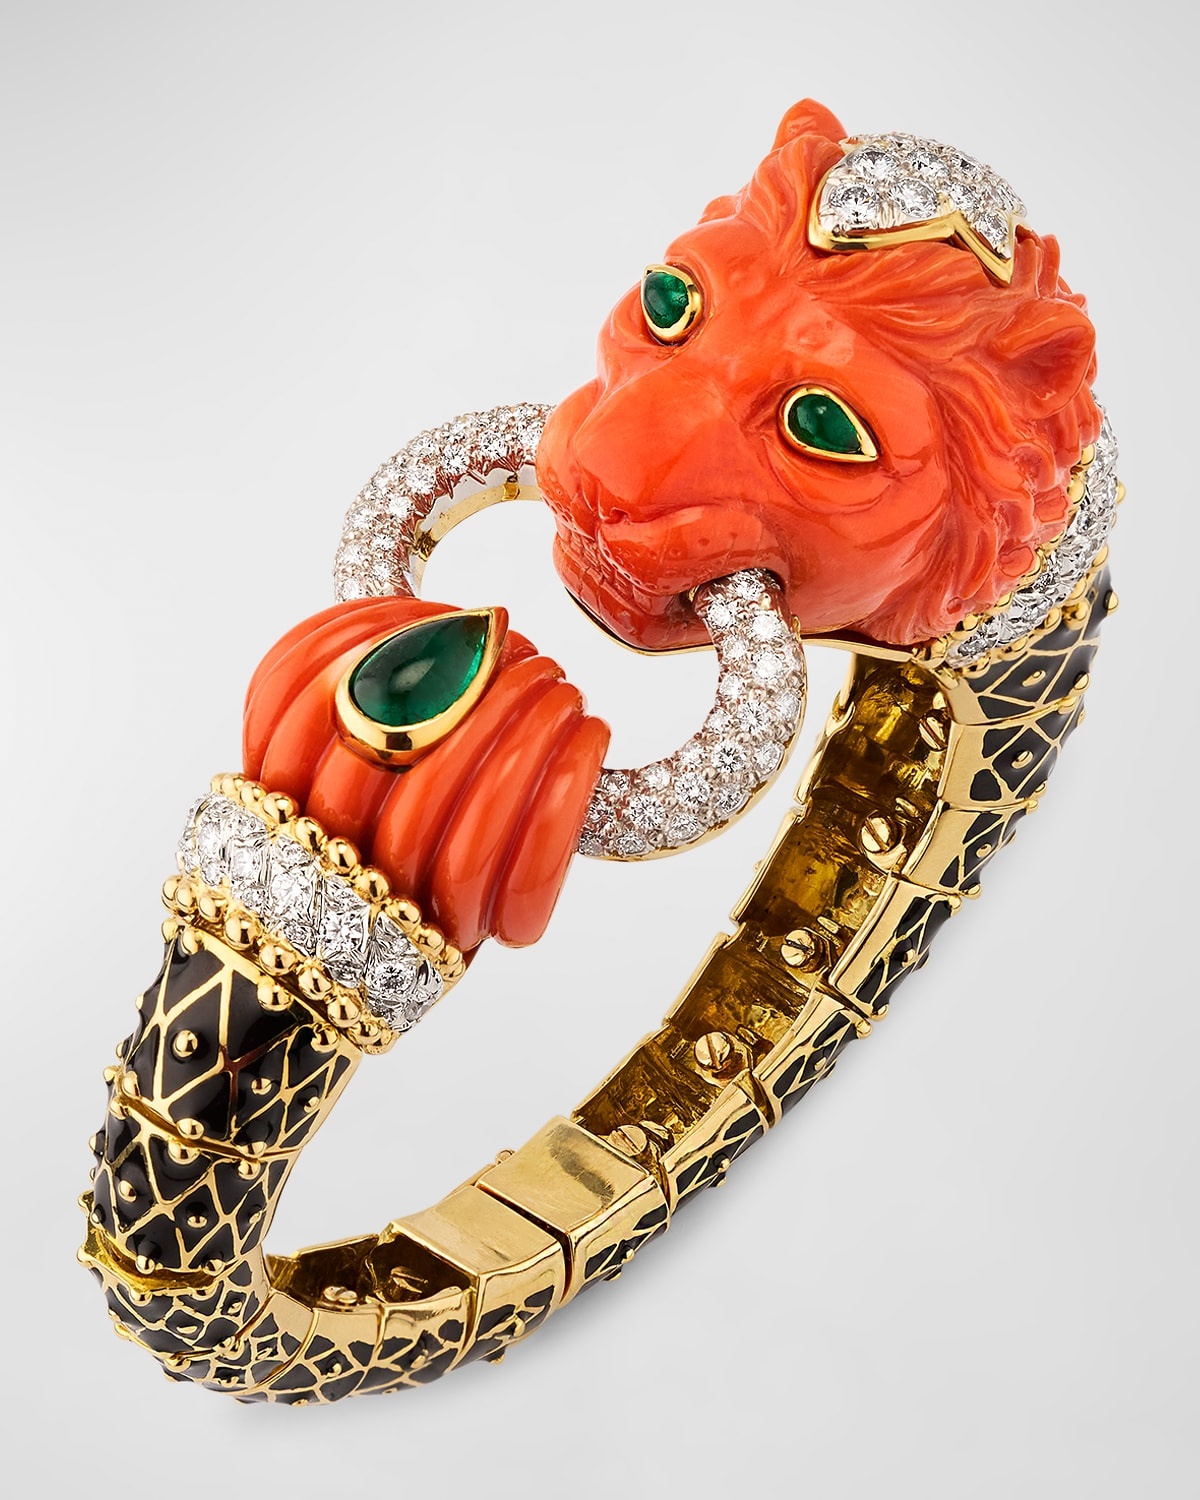 18K Yellow Gold and Platinum Lion Bracelet with Coral, Emerald and Diamonds - 3